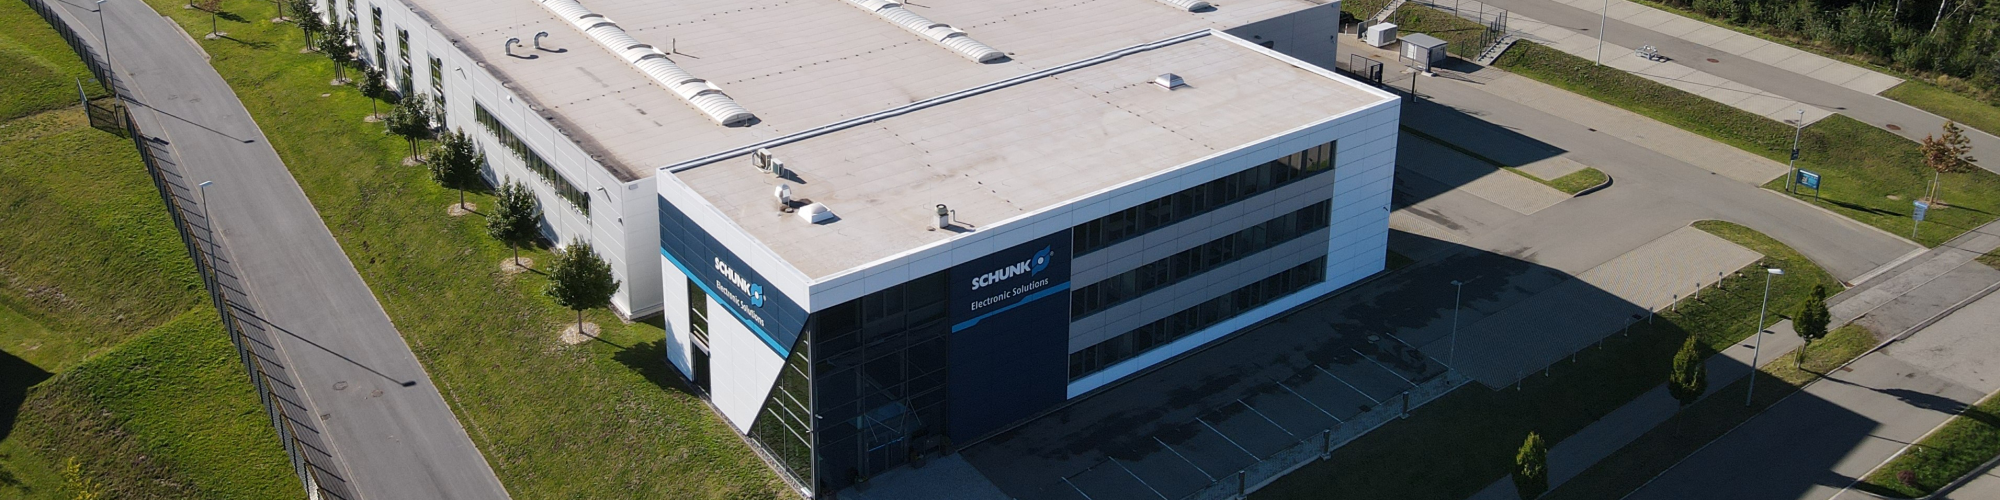 SCHUNK Electronic Solutions